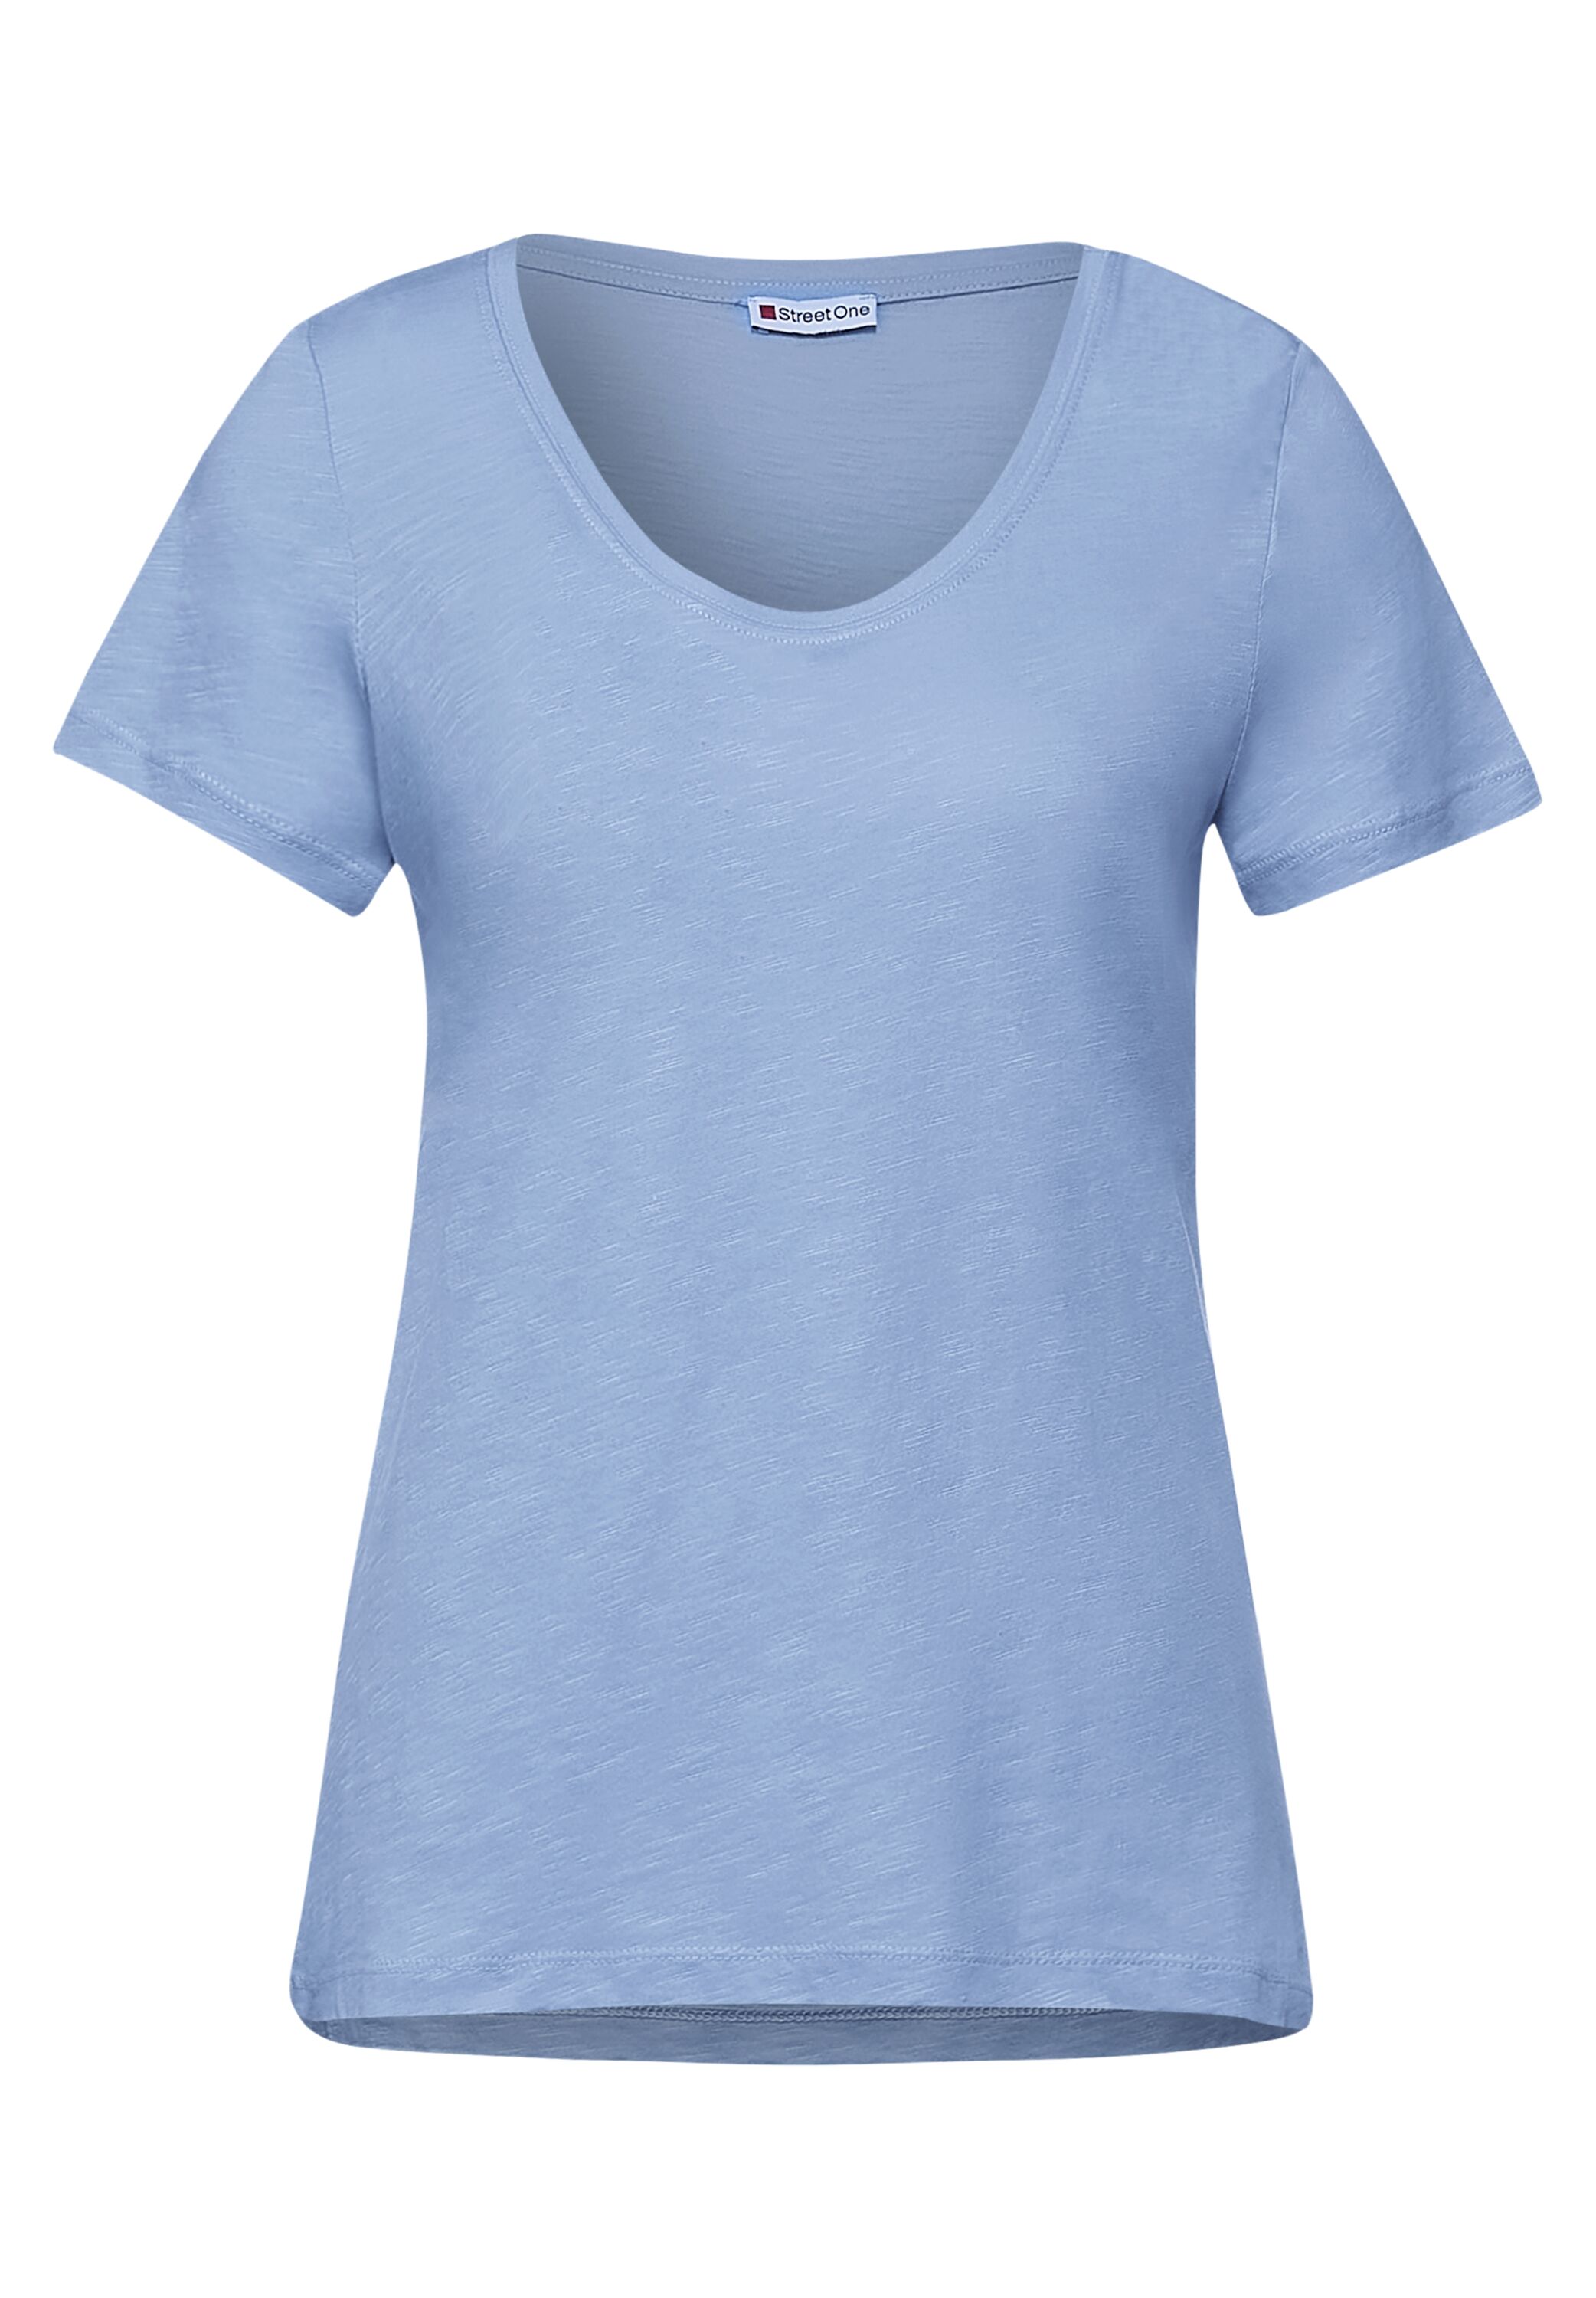 Street One T-Shirt Gerda in Sunny A316300-13032 - Mid Mode CONCEPT Blue